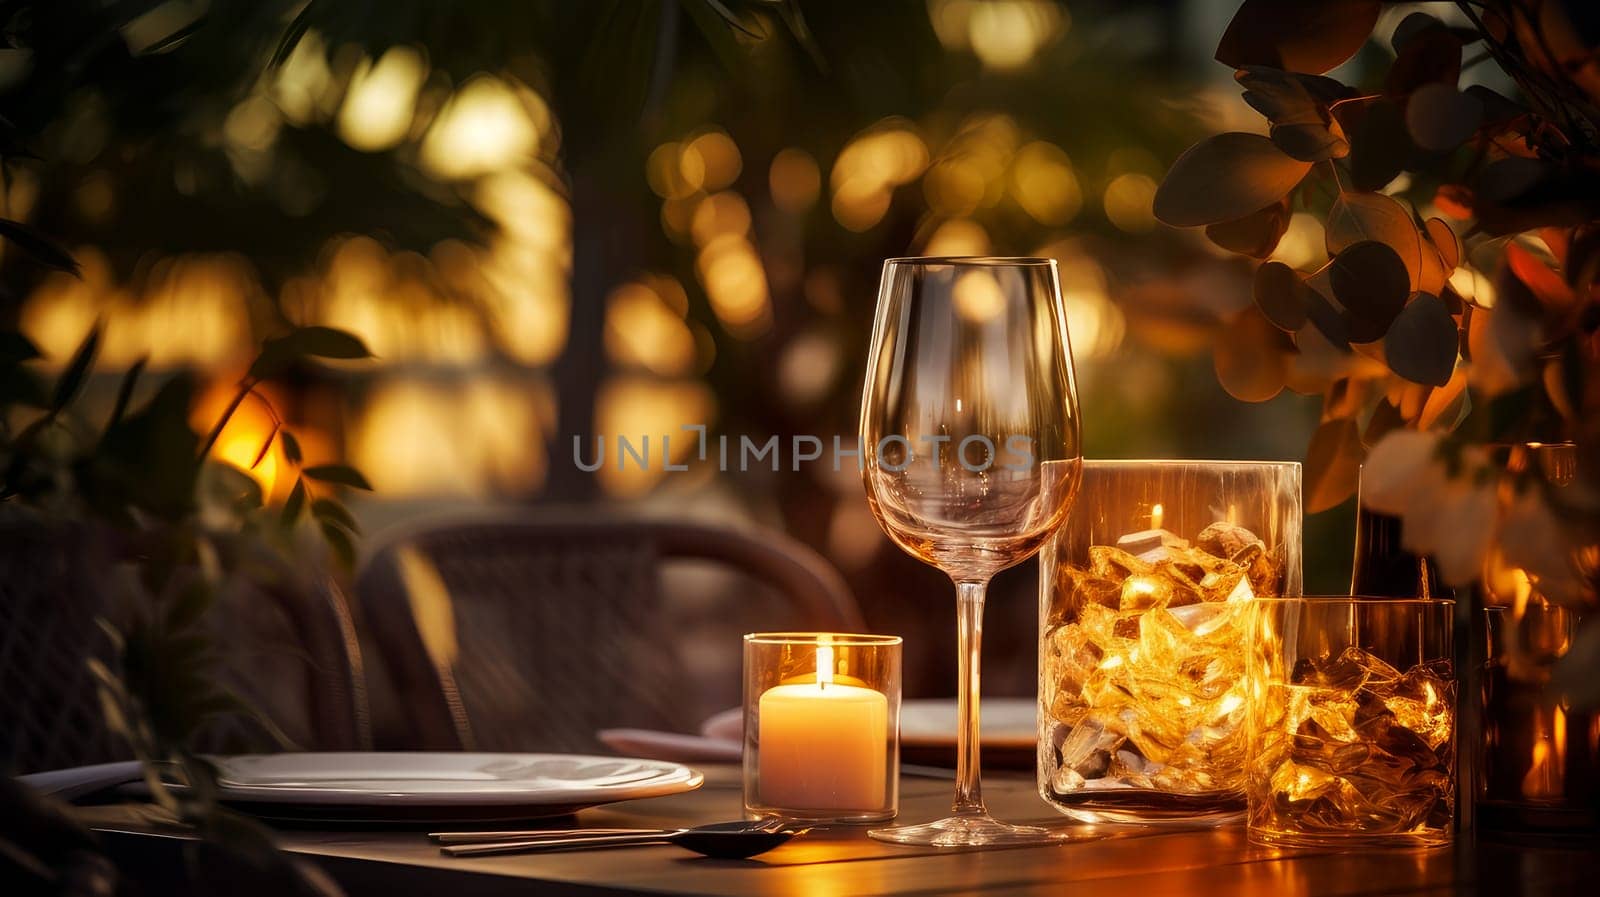 Dinner in a chic restaurant, on the terrace in the fresh air, by candlelight with a glass of champagne or wine, with beautiful glowing lights. Valentine's day, newlyweds, engagement, holiday, birthday, wedding, anniversary, surprise, date.